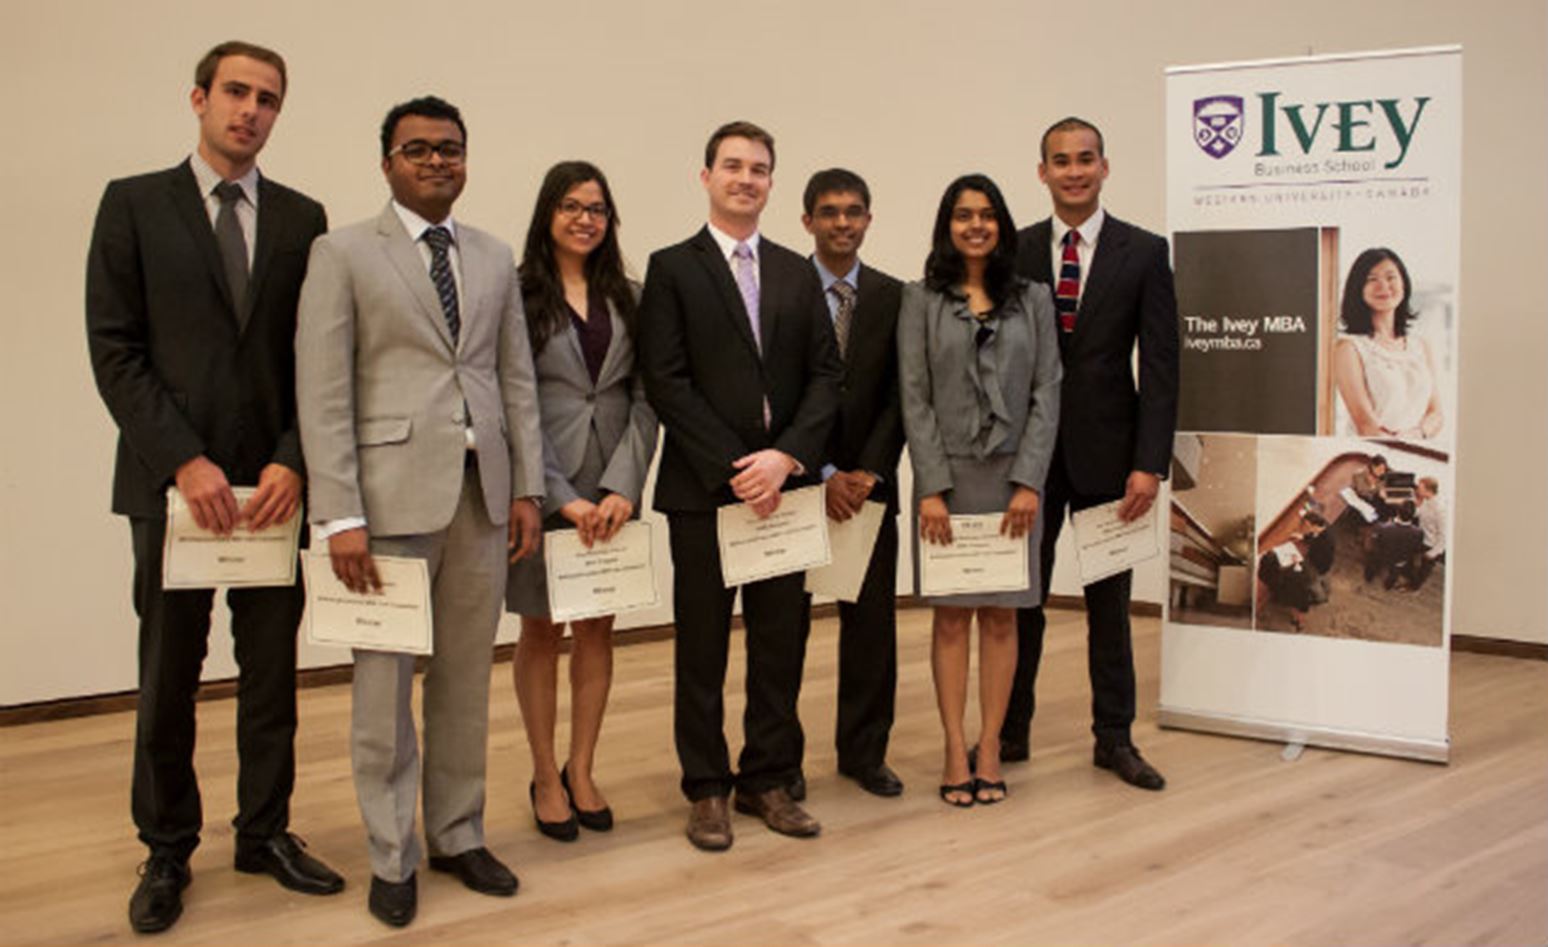 mckinsey case study competition